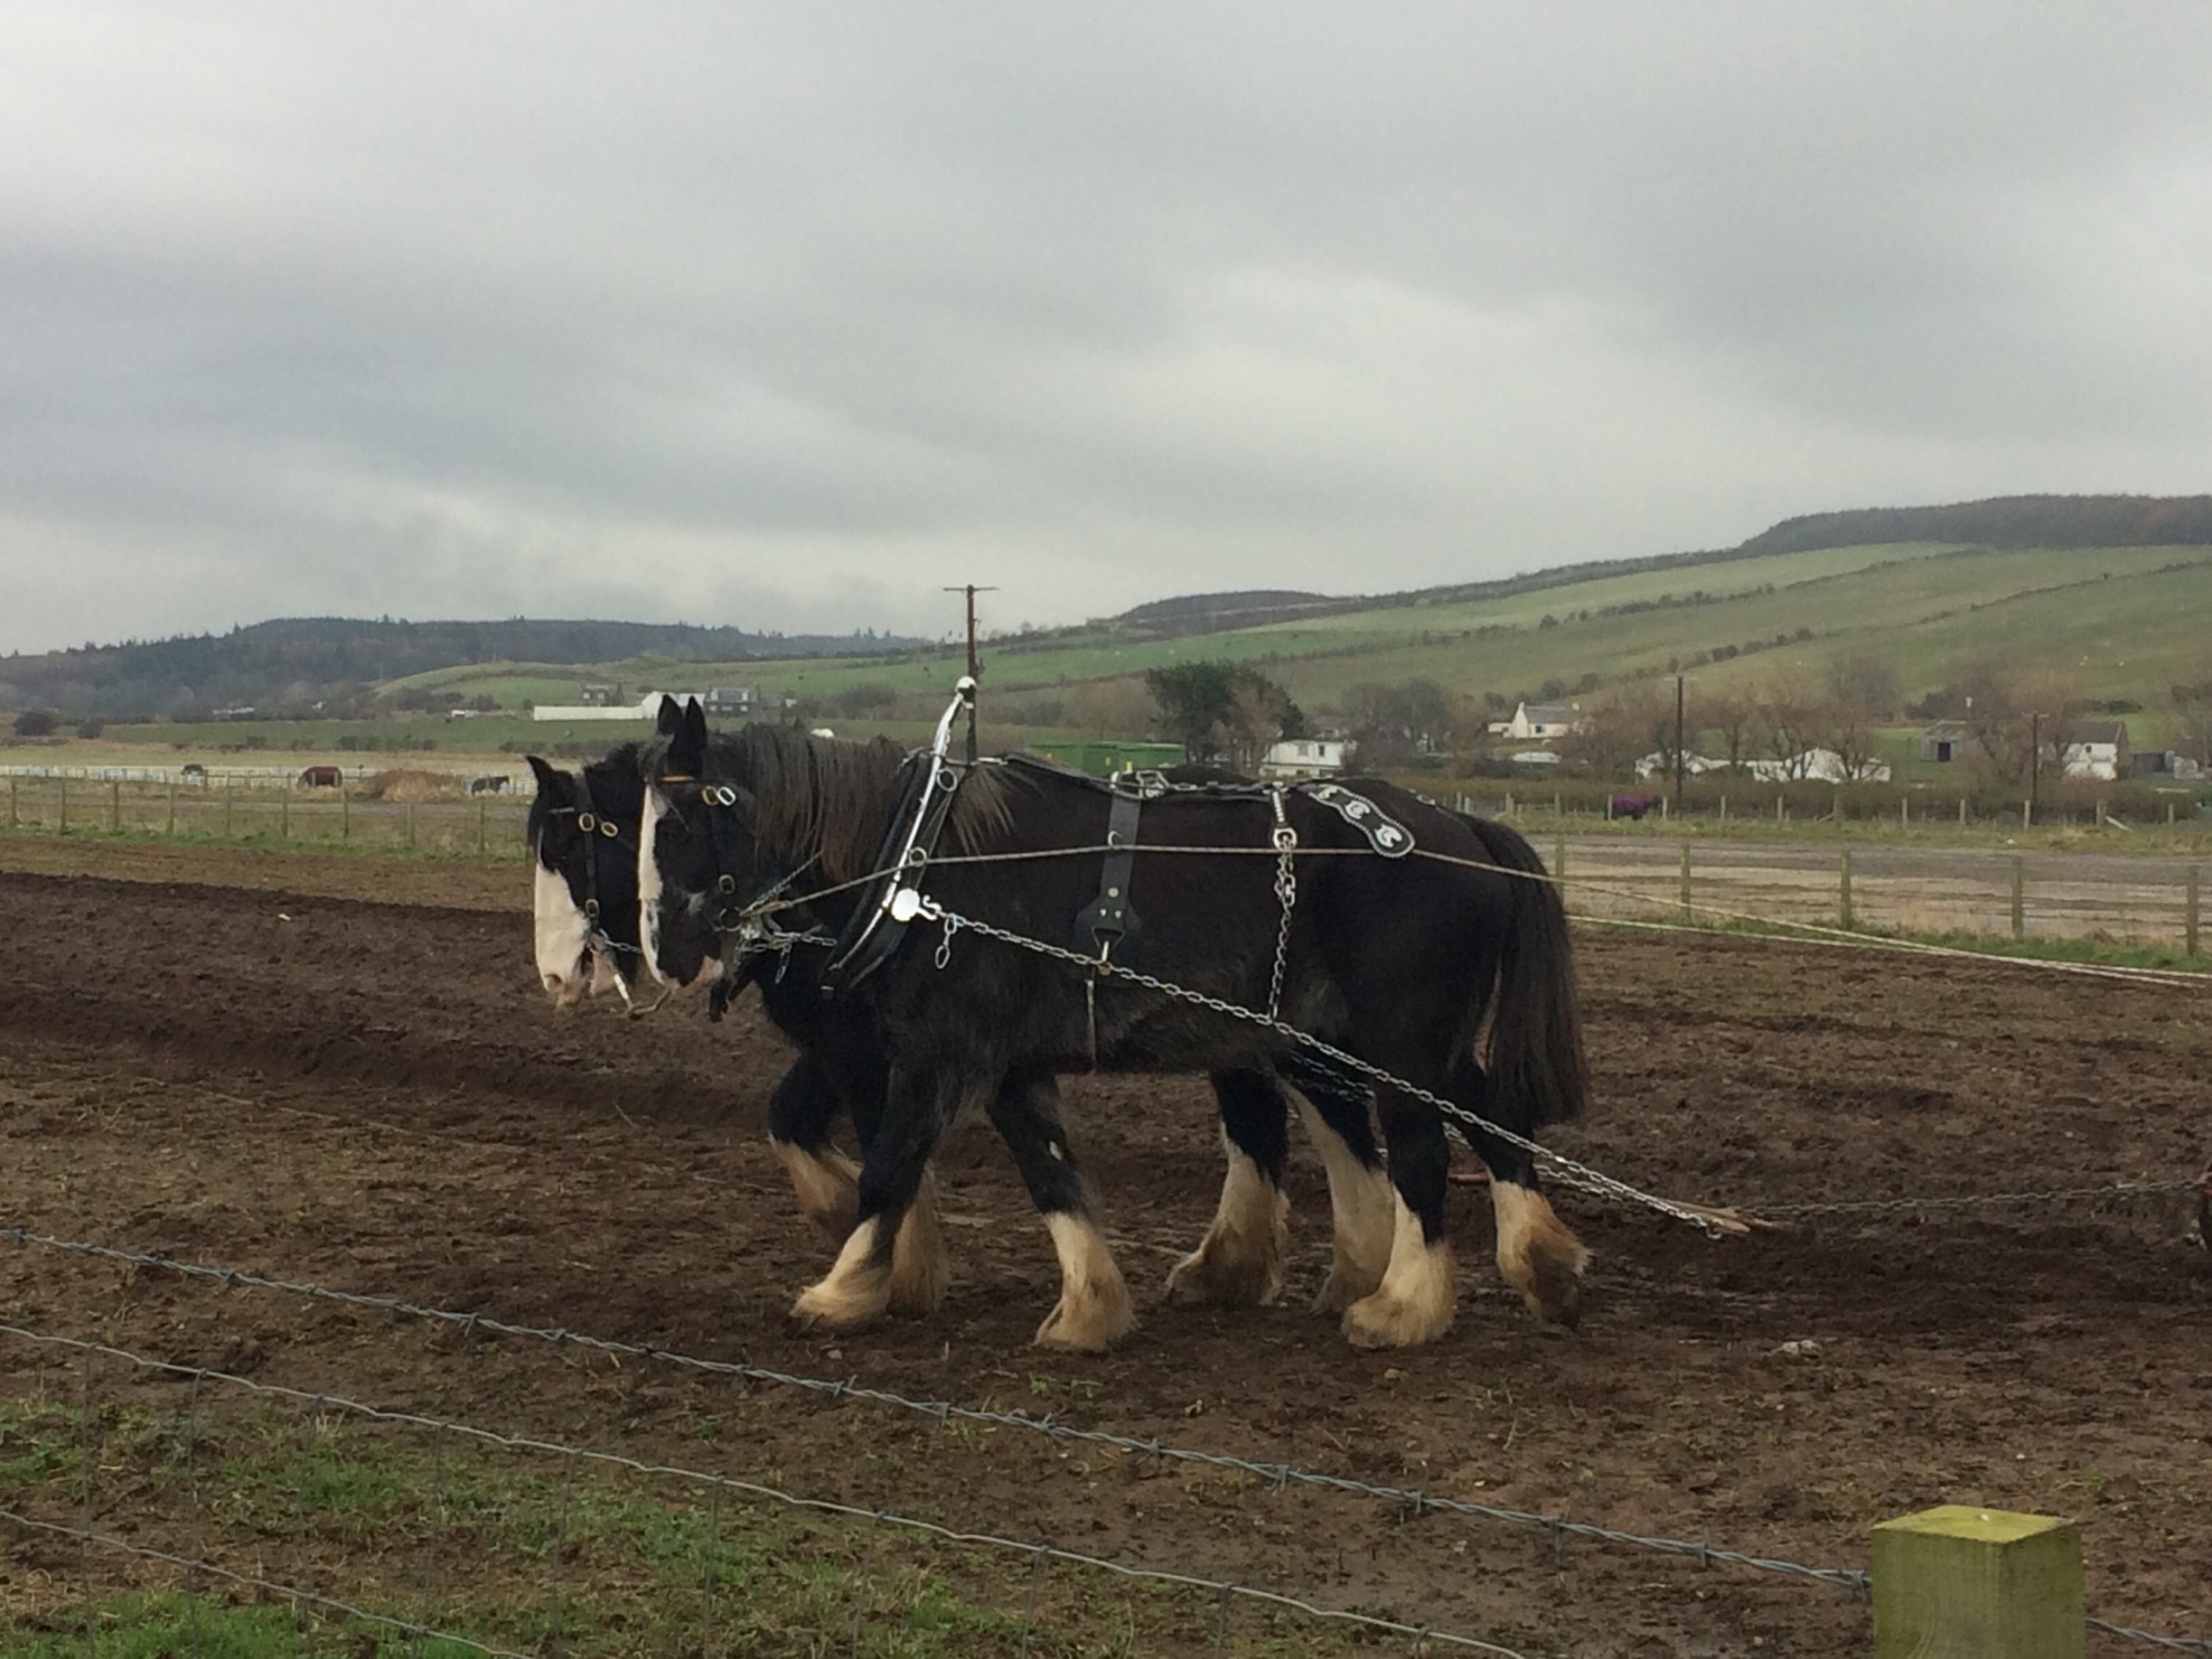 Clydesdale horses ploughing the old fashioned way